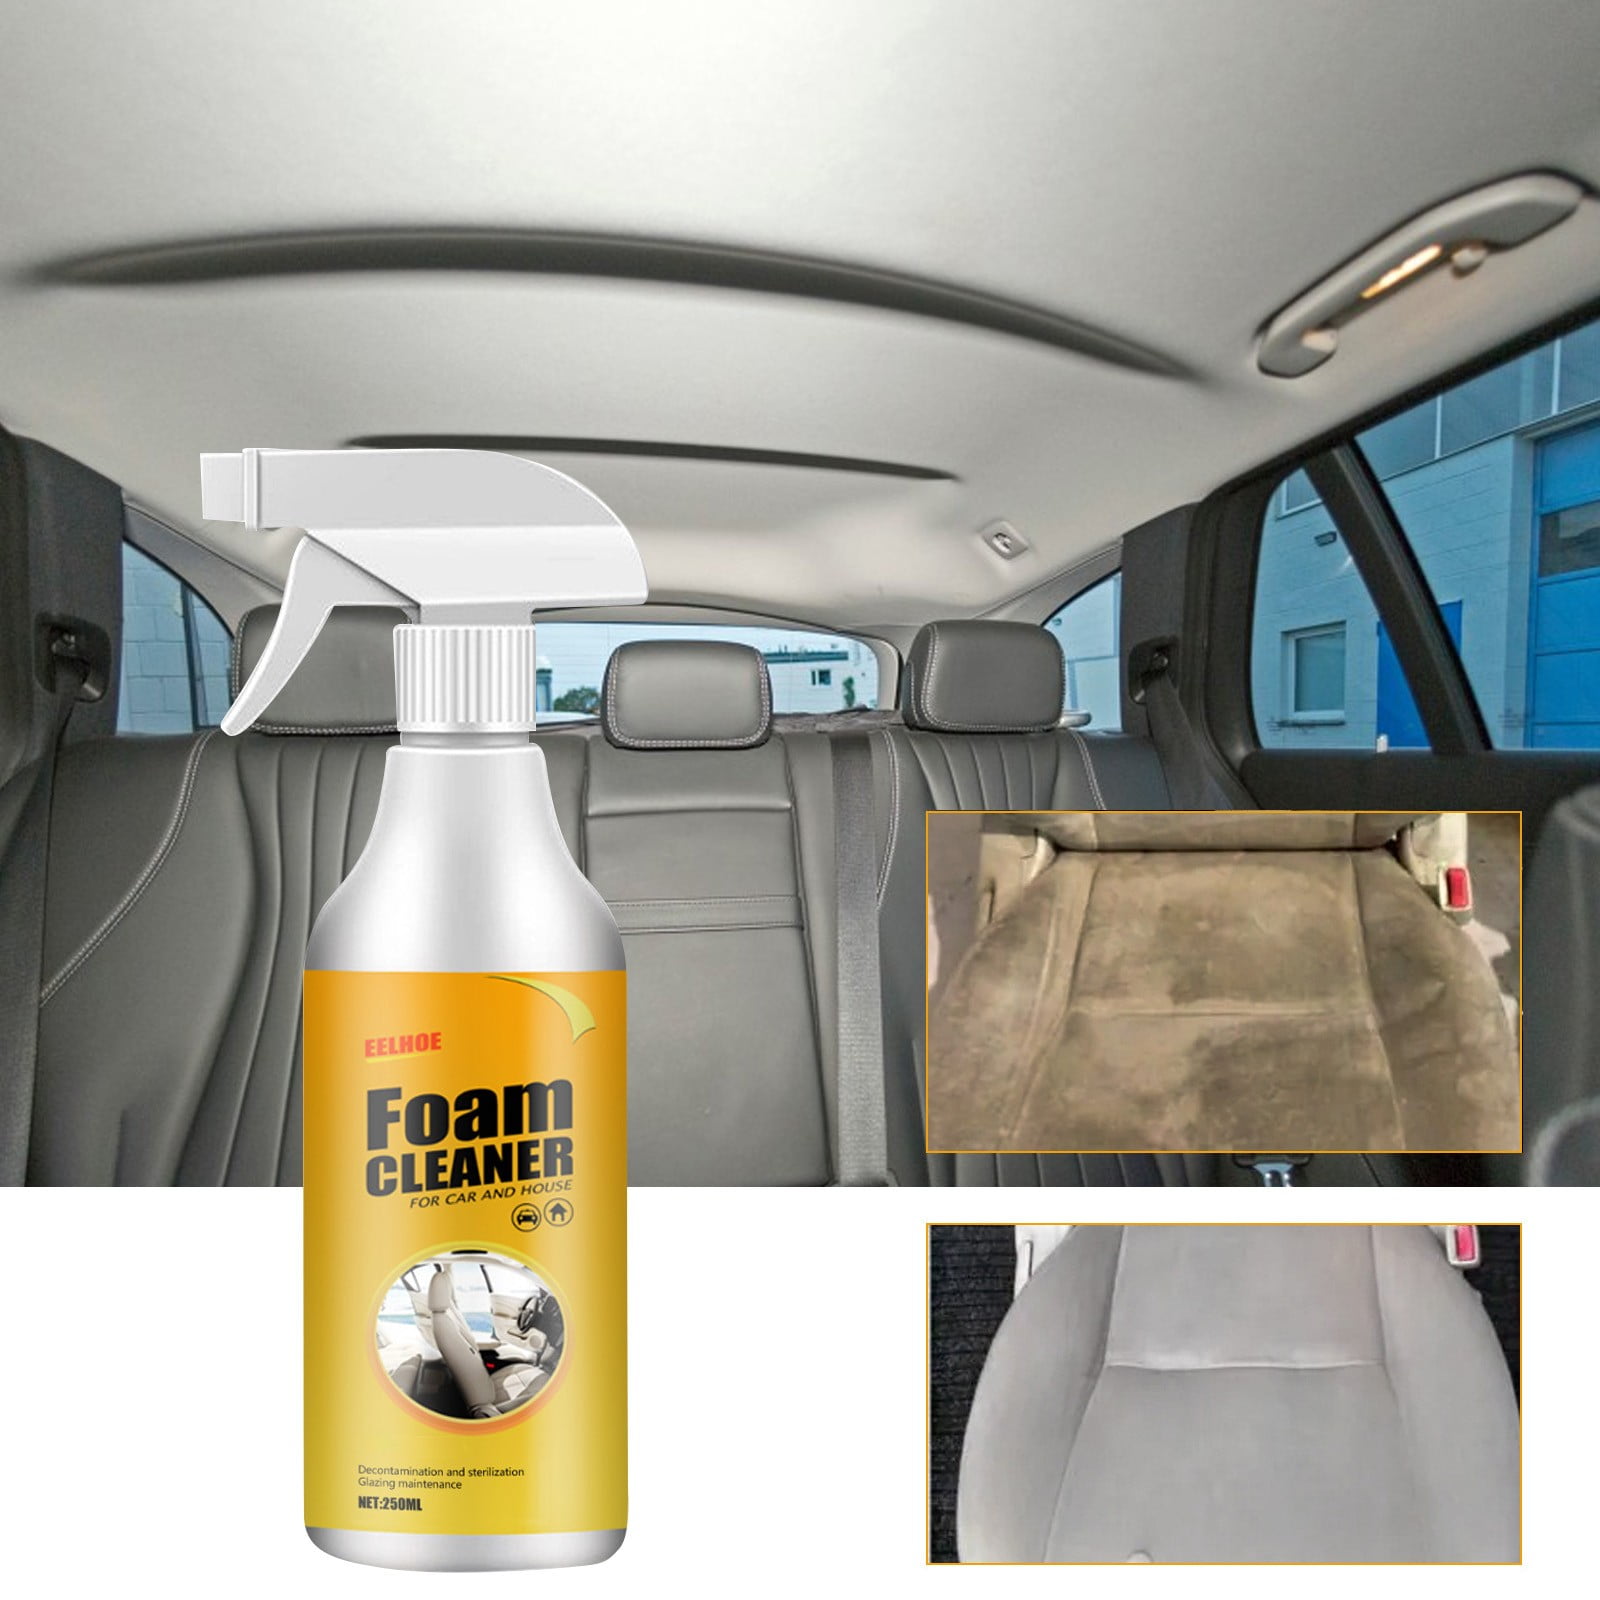 Tiitstoy Multi-Purpose Foam Cleaner Cleaning Spay Cleaning Artifact Strong Foam Leather Decontamination Foam Cleaner for Kitchen, Bathroom, Car and